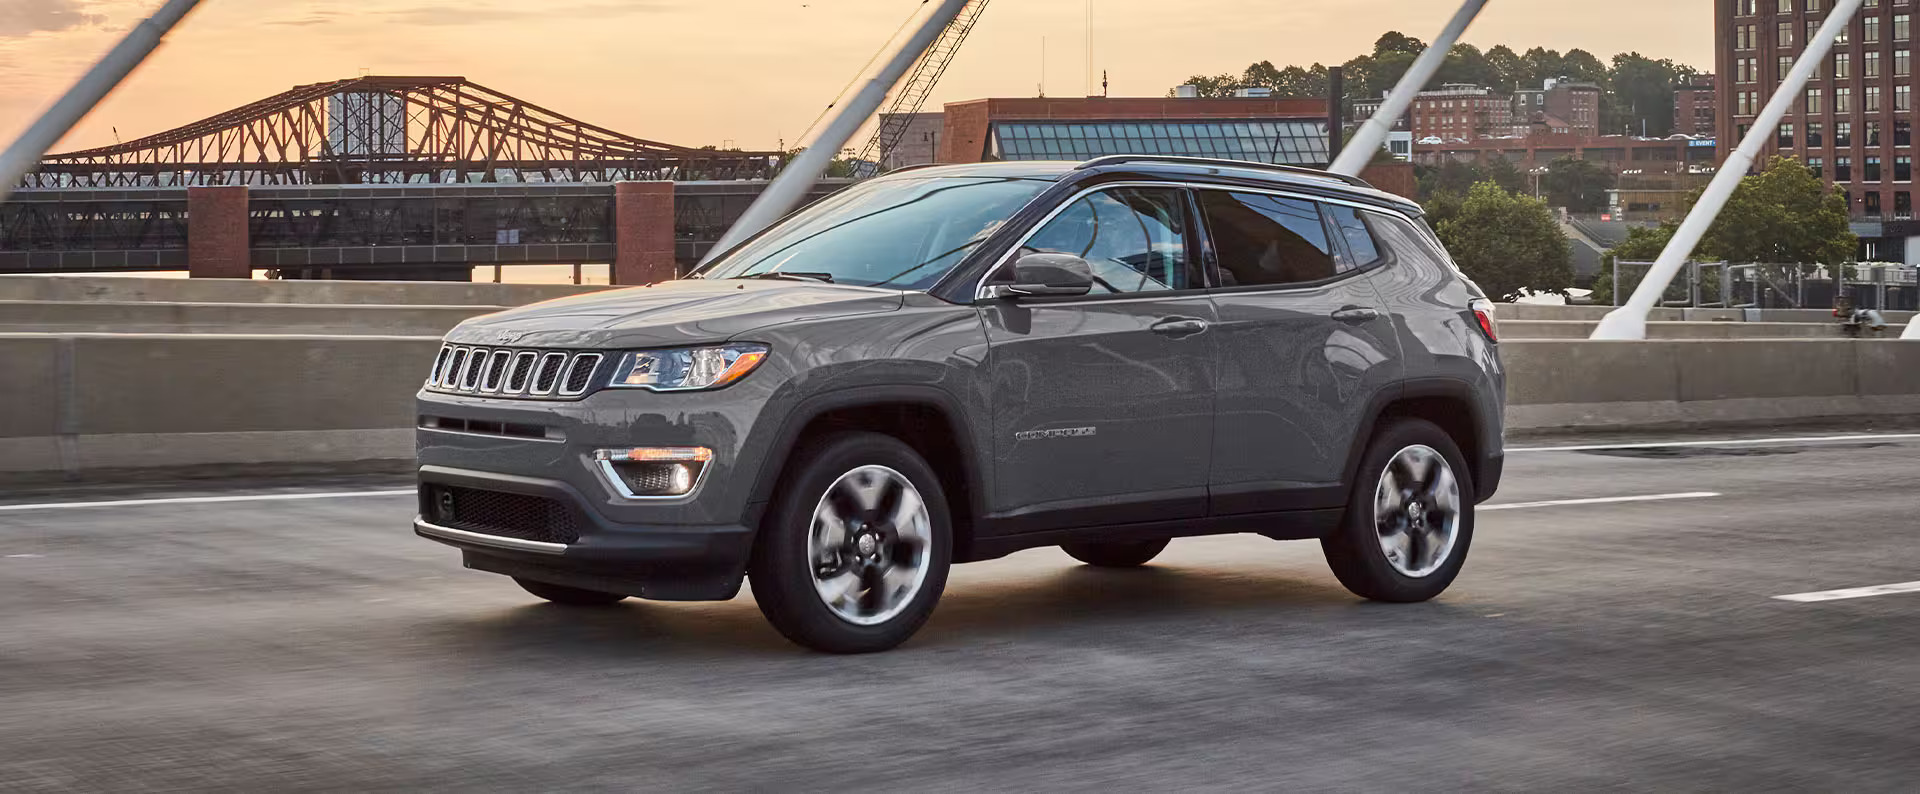 Jeep Compass Problems: Troubleshooting Tips & Solutions